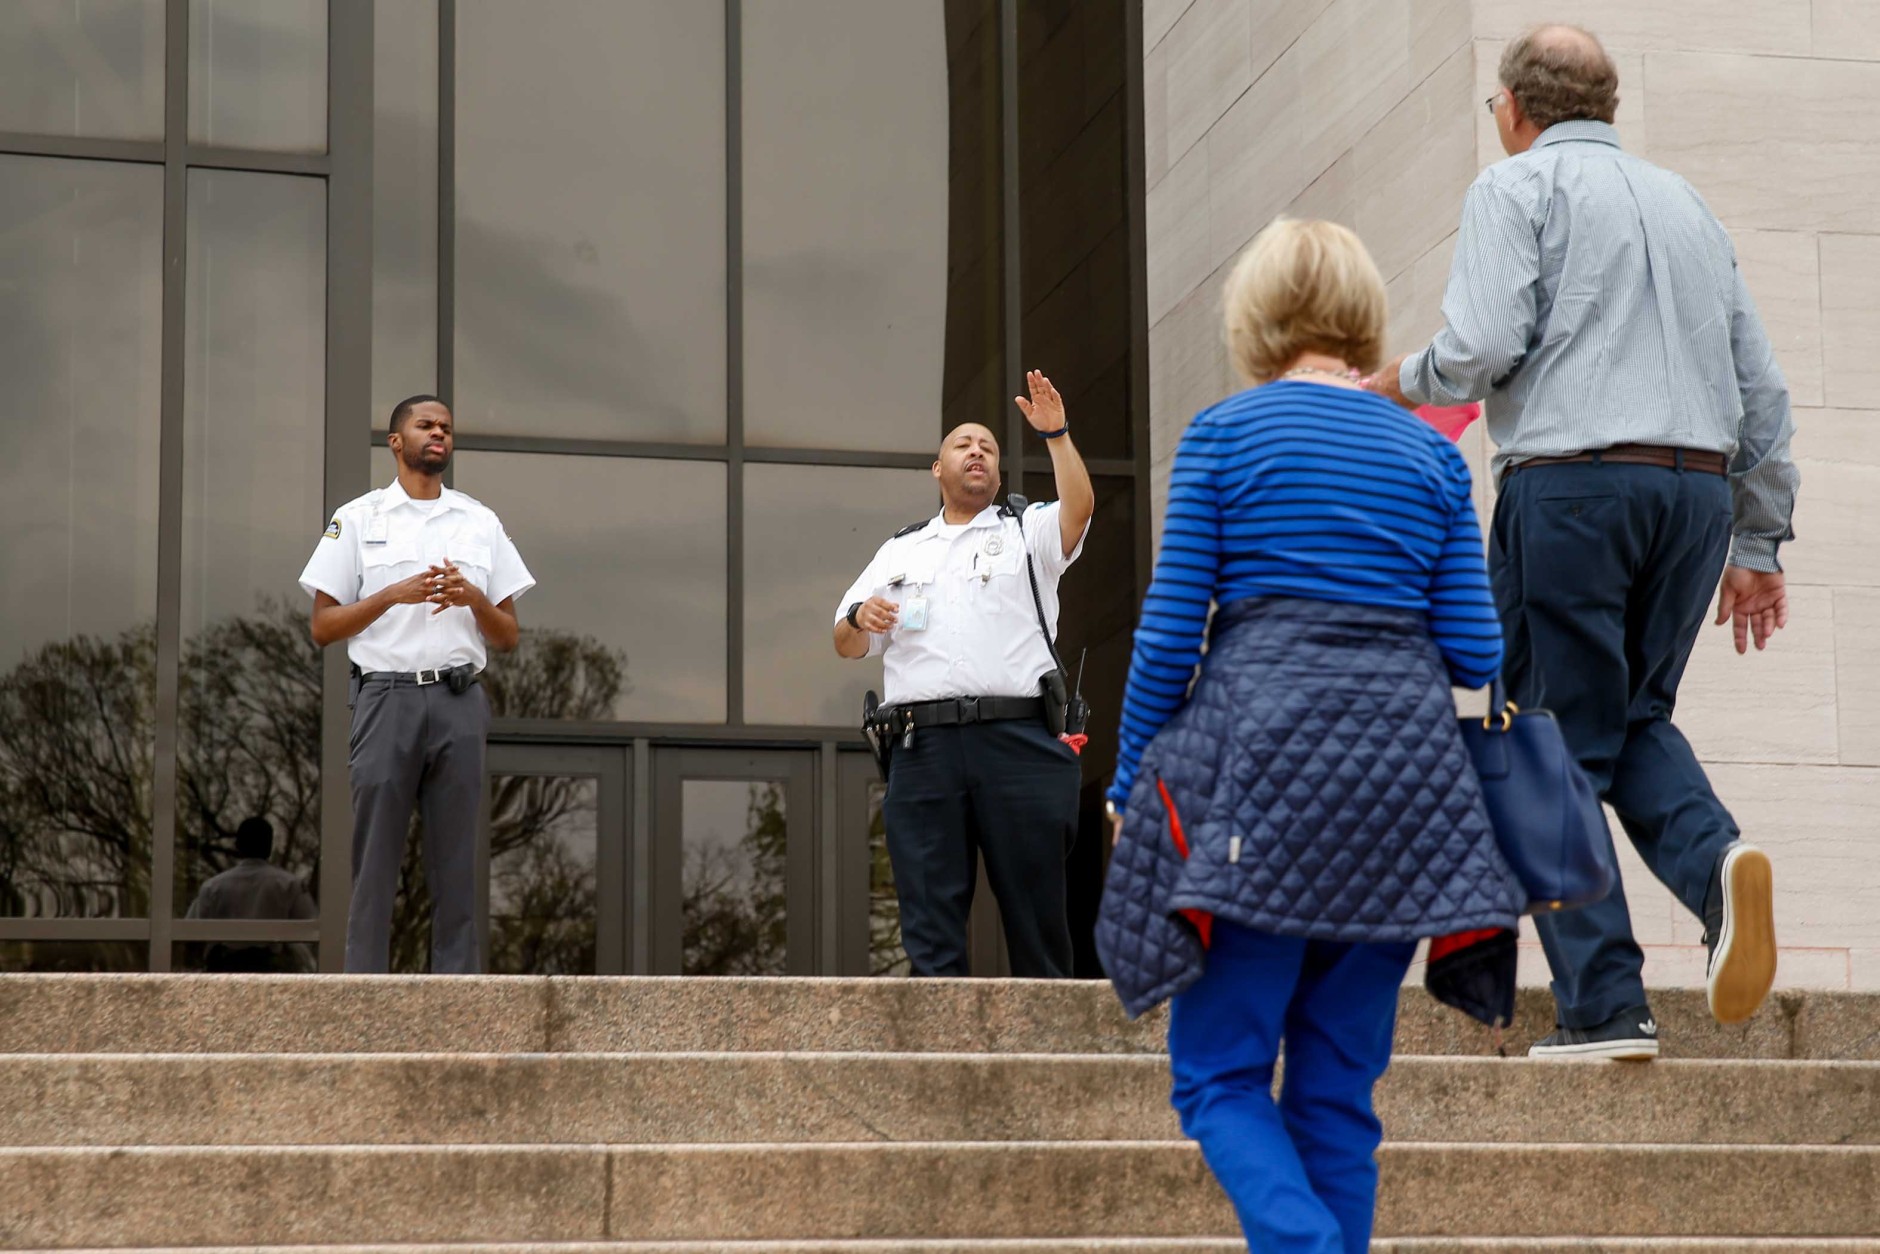 Security guards turn visitors away from the Smithsonian's National Air and Space Museum in Washington, Tuesday, April 7, 2015, after widespread power outages cause many of the buildings along the National Mall to shut down temporarily. Widespread power outages affected the White House, State Department, Capitol and other sites across Washington and its suburbs Tuesday afternoon — all because of an explosion at a power plant in southern Maryland, an official said.  (AP Photo/Andrew Harnik)